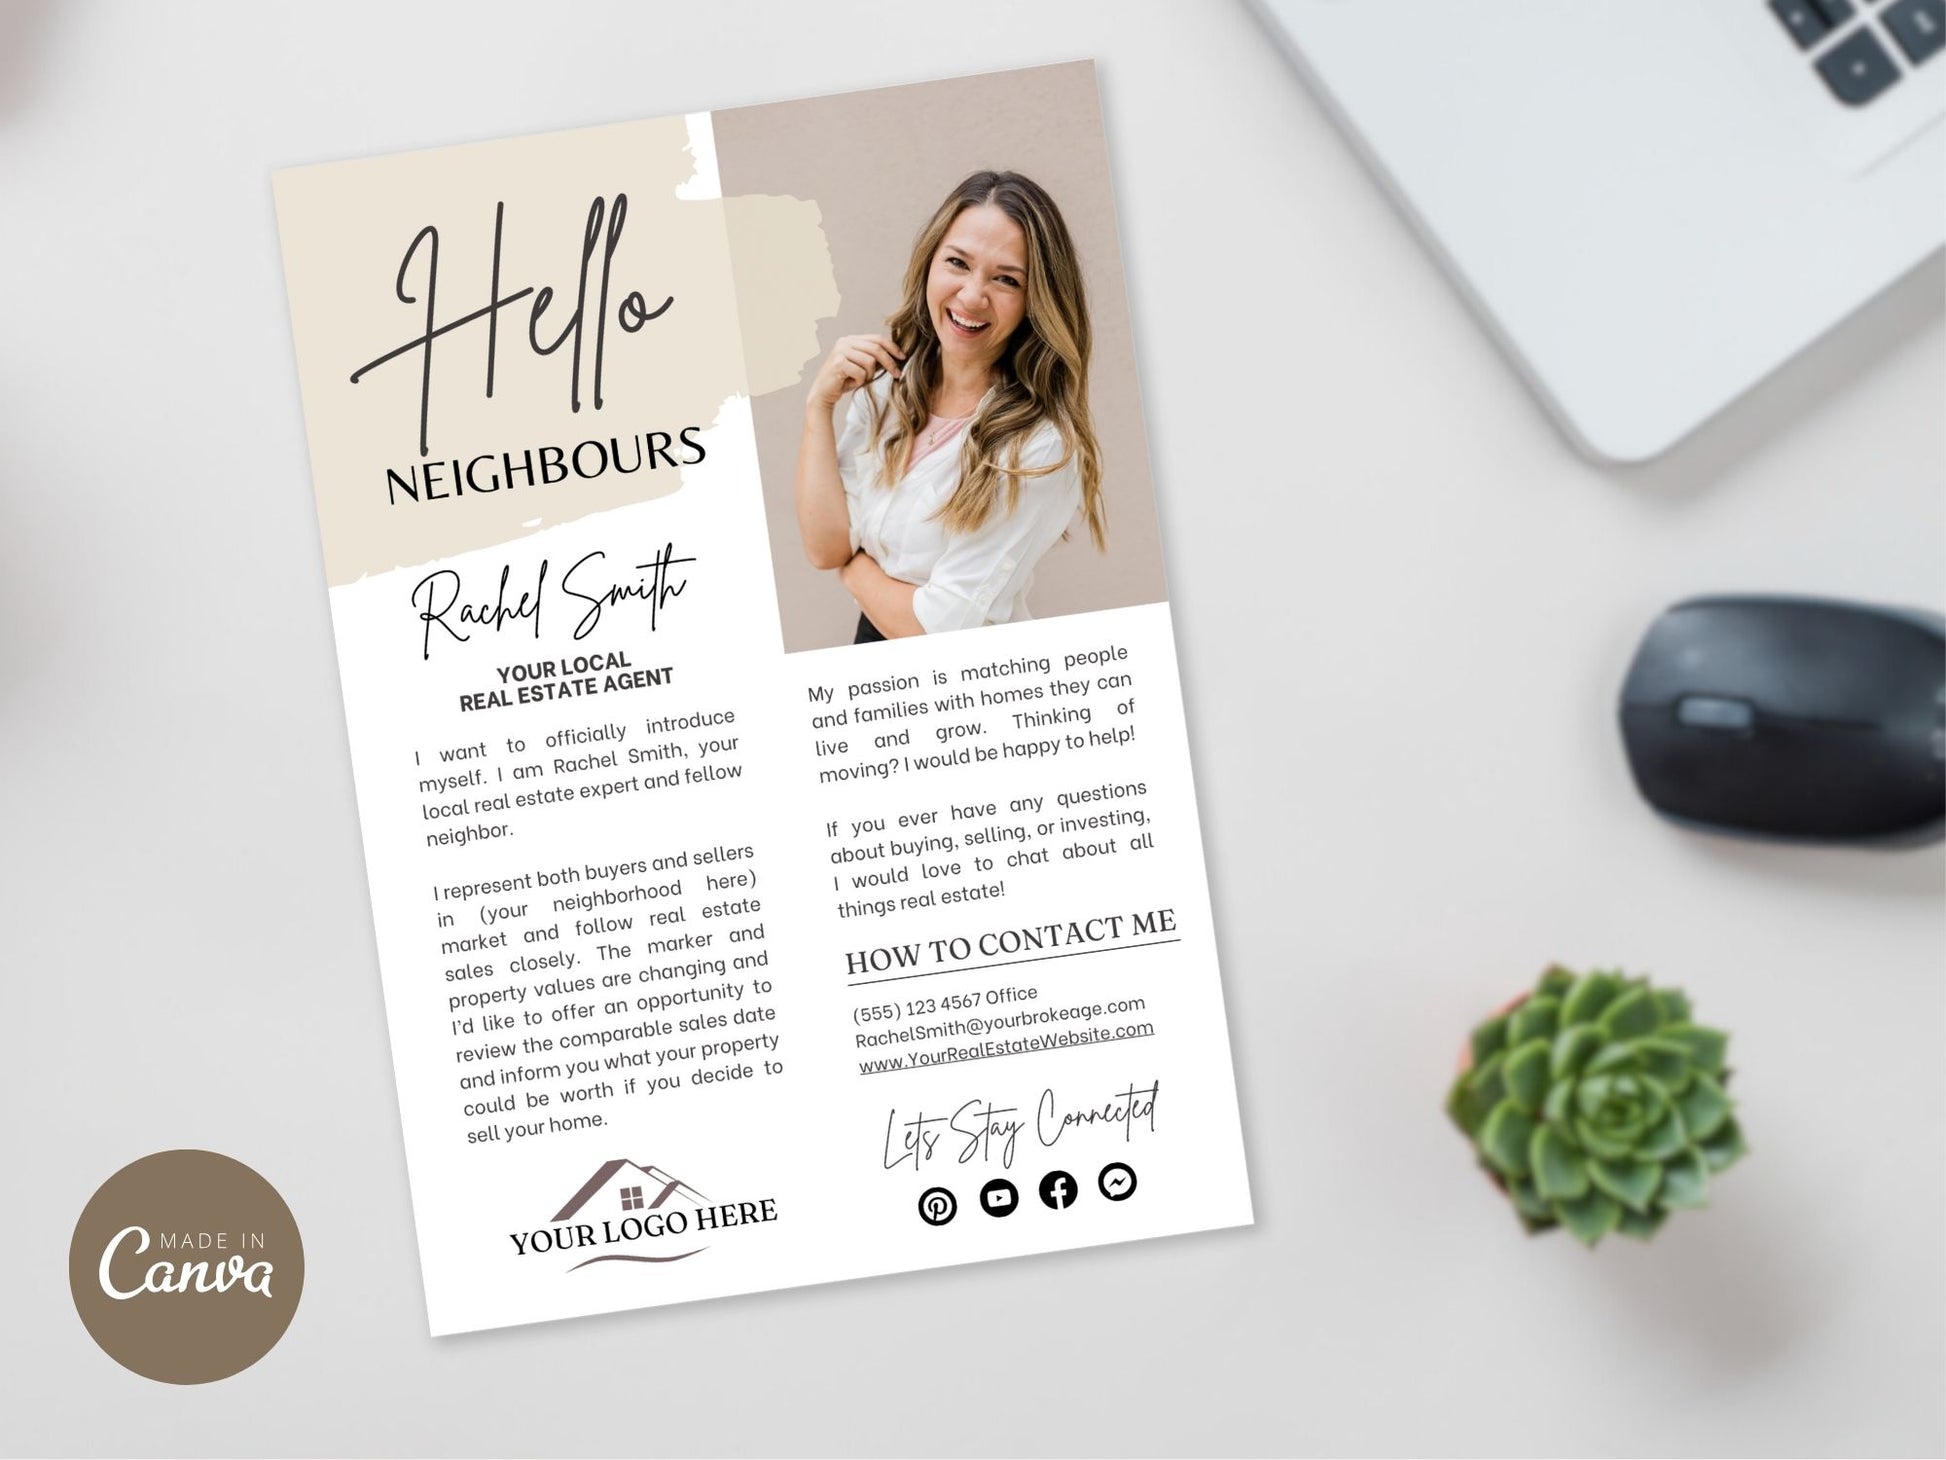 Hello Neighbors Real Estate Letter Vol 03 - Professionally designed real estate letter template for fostering connections with your community.